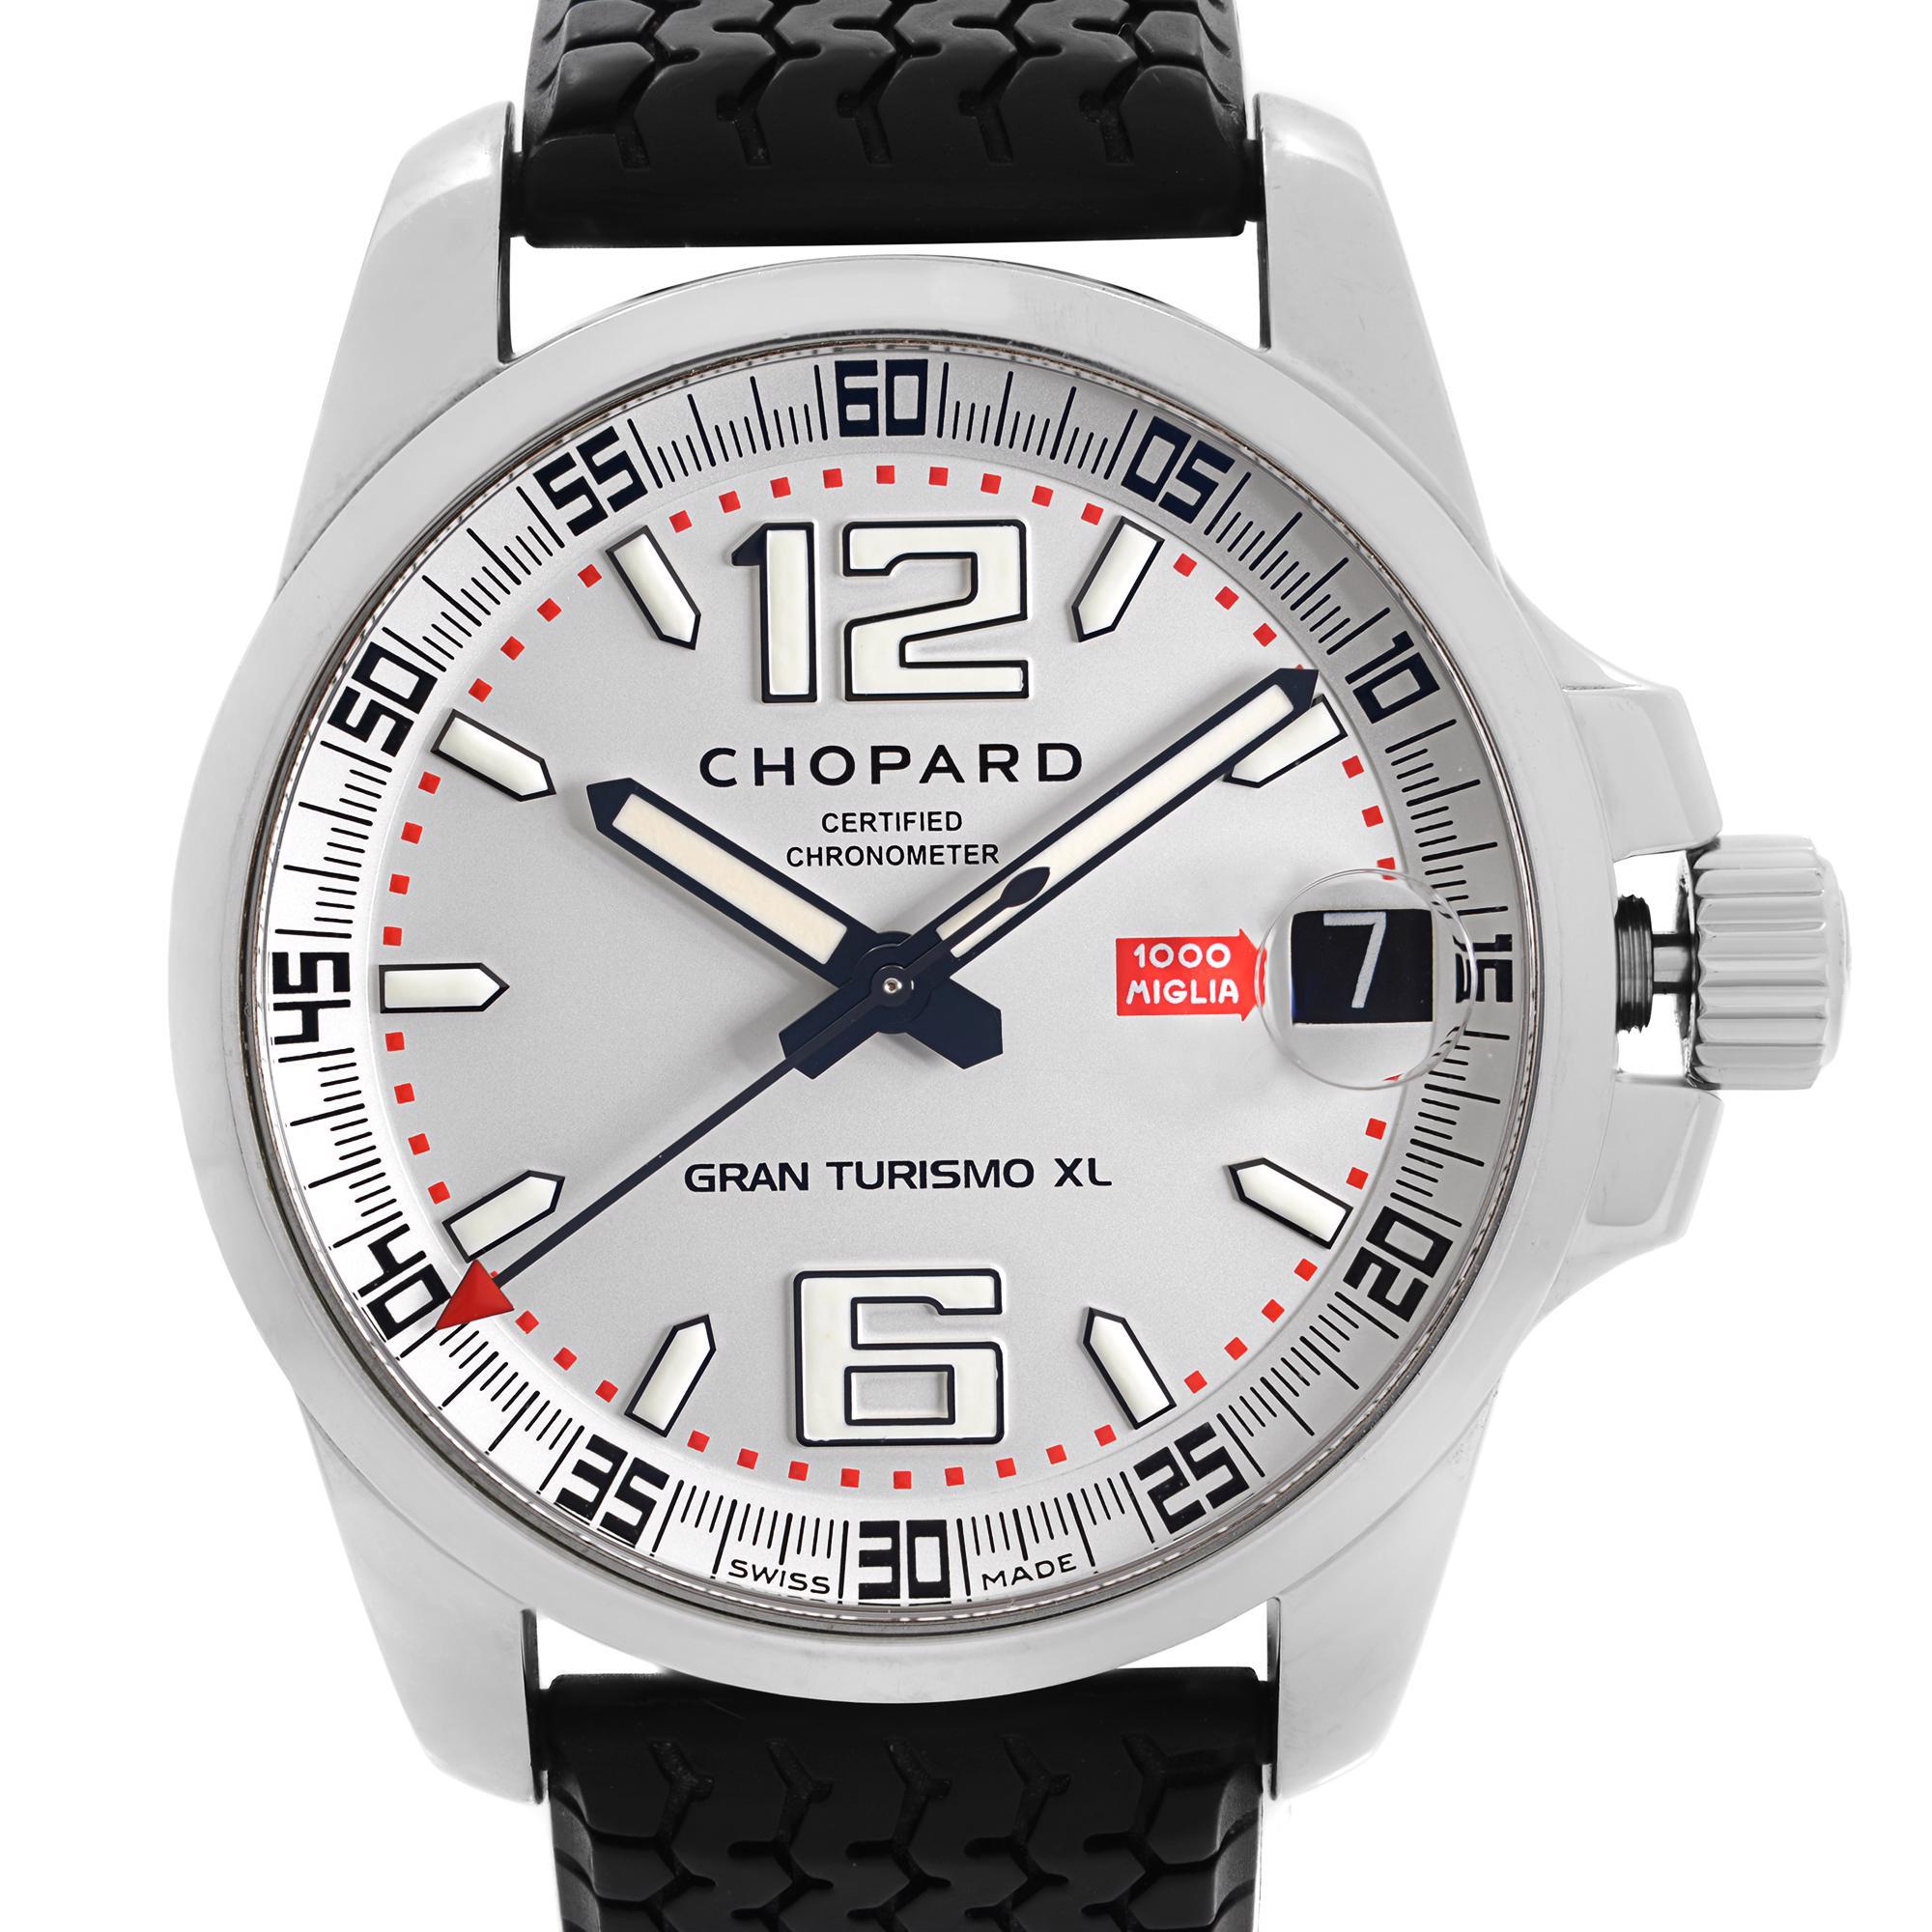 Pre-owned Chopard Mille Miglia GT XL 44mm Steel Silver Dial Automatic Men's Watch 16/8458. The loop holder on the band is broken. This Beautiful Timepiece is Powered by Mechanical (Automatic) Movement And Features: Stainless Steel Case and Black